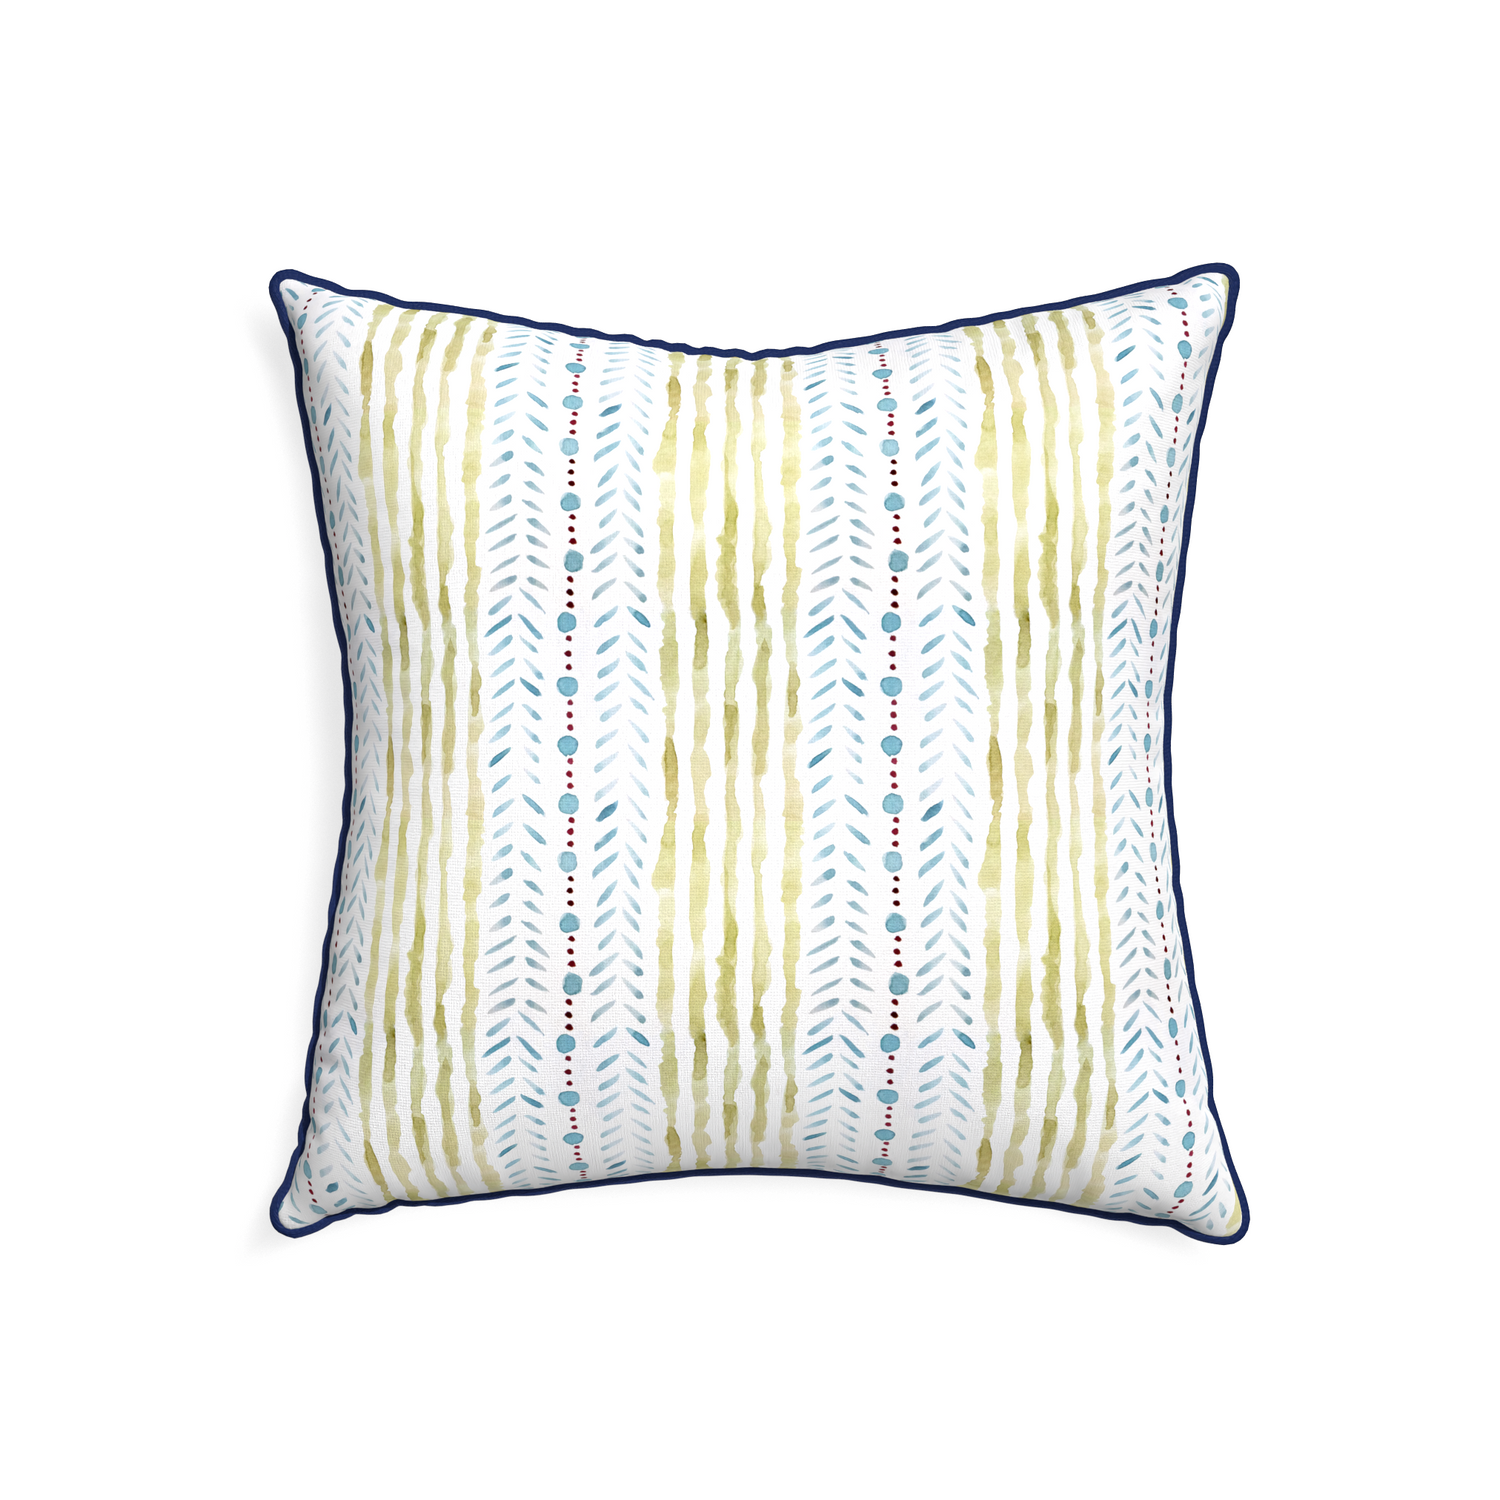 22-square julia custom pillow with midnight piping on white background